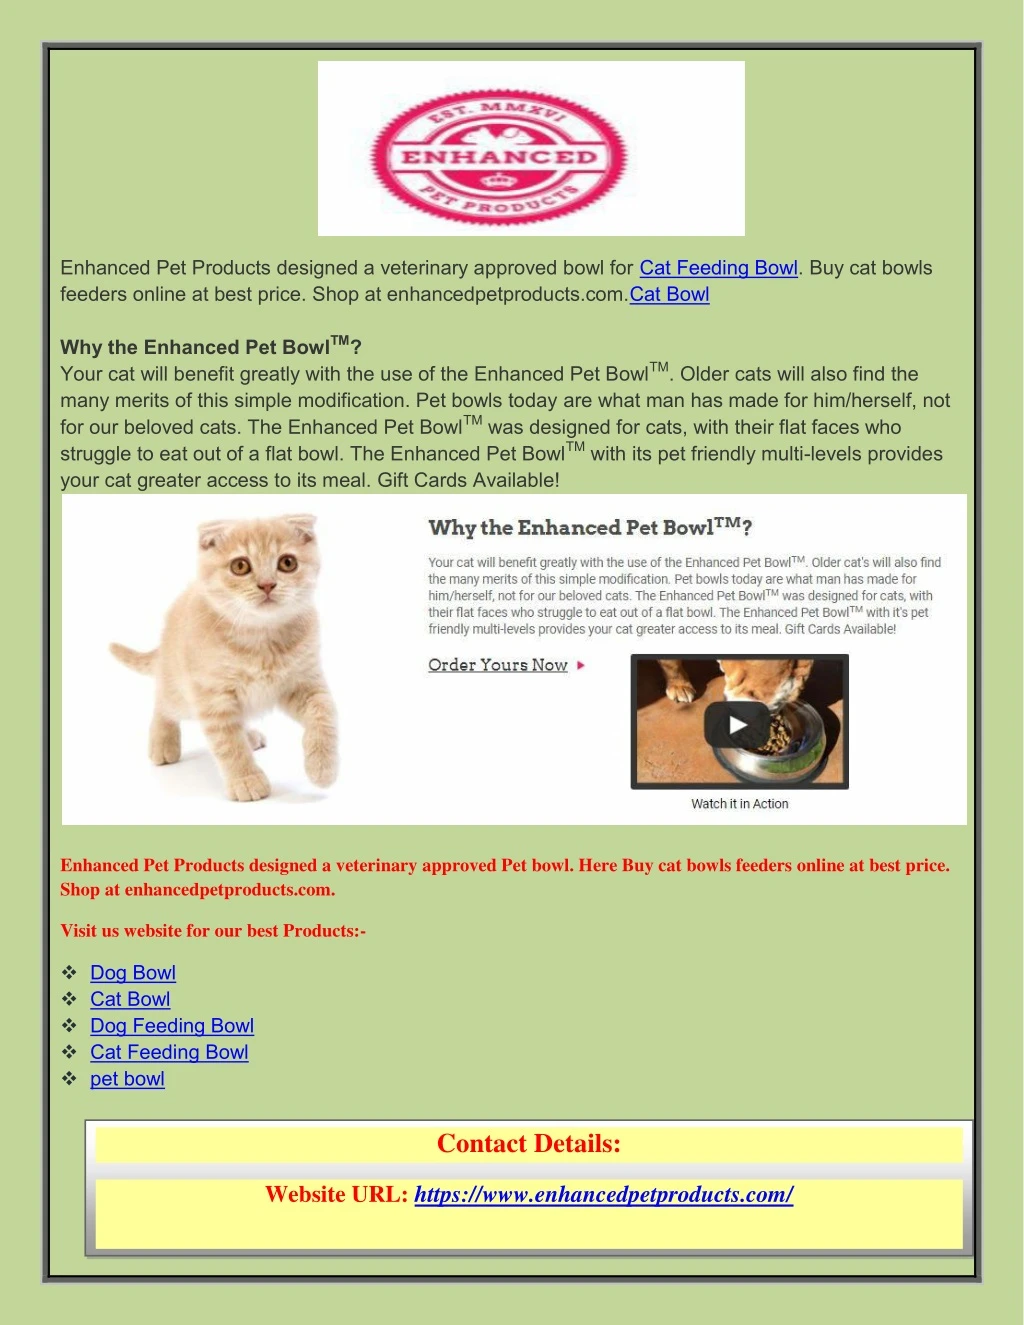 enhanced pet products designed a veterinary